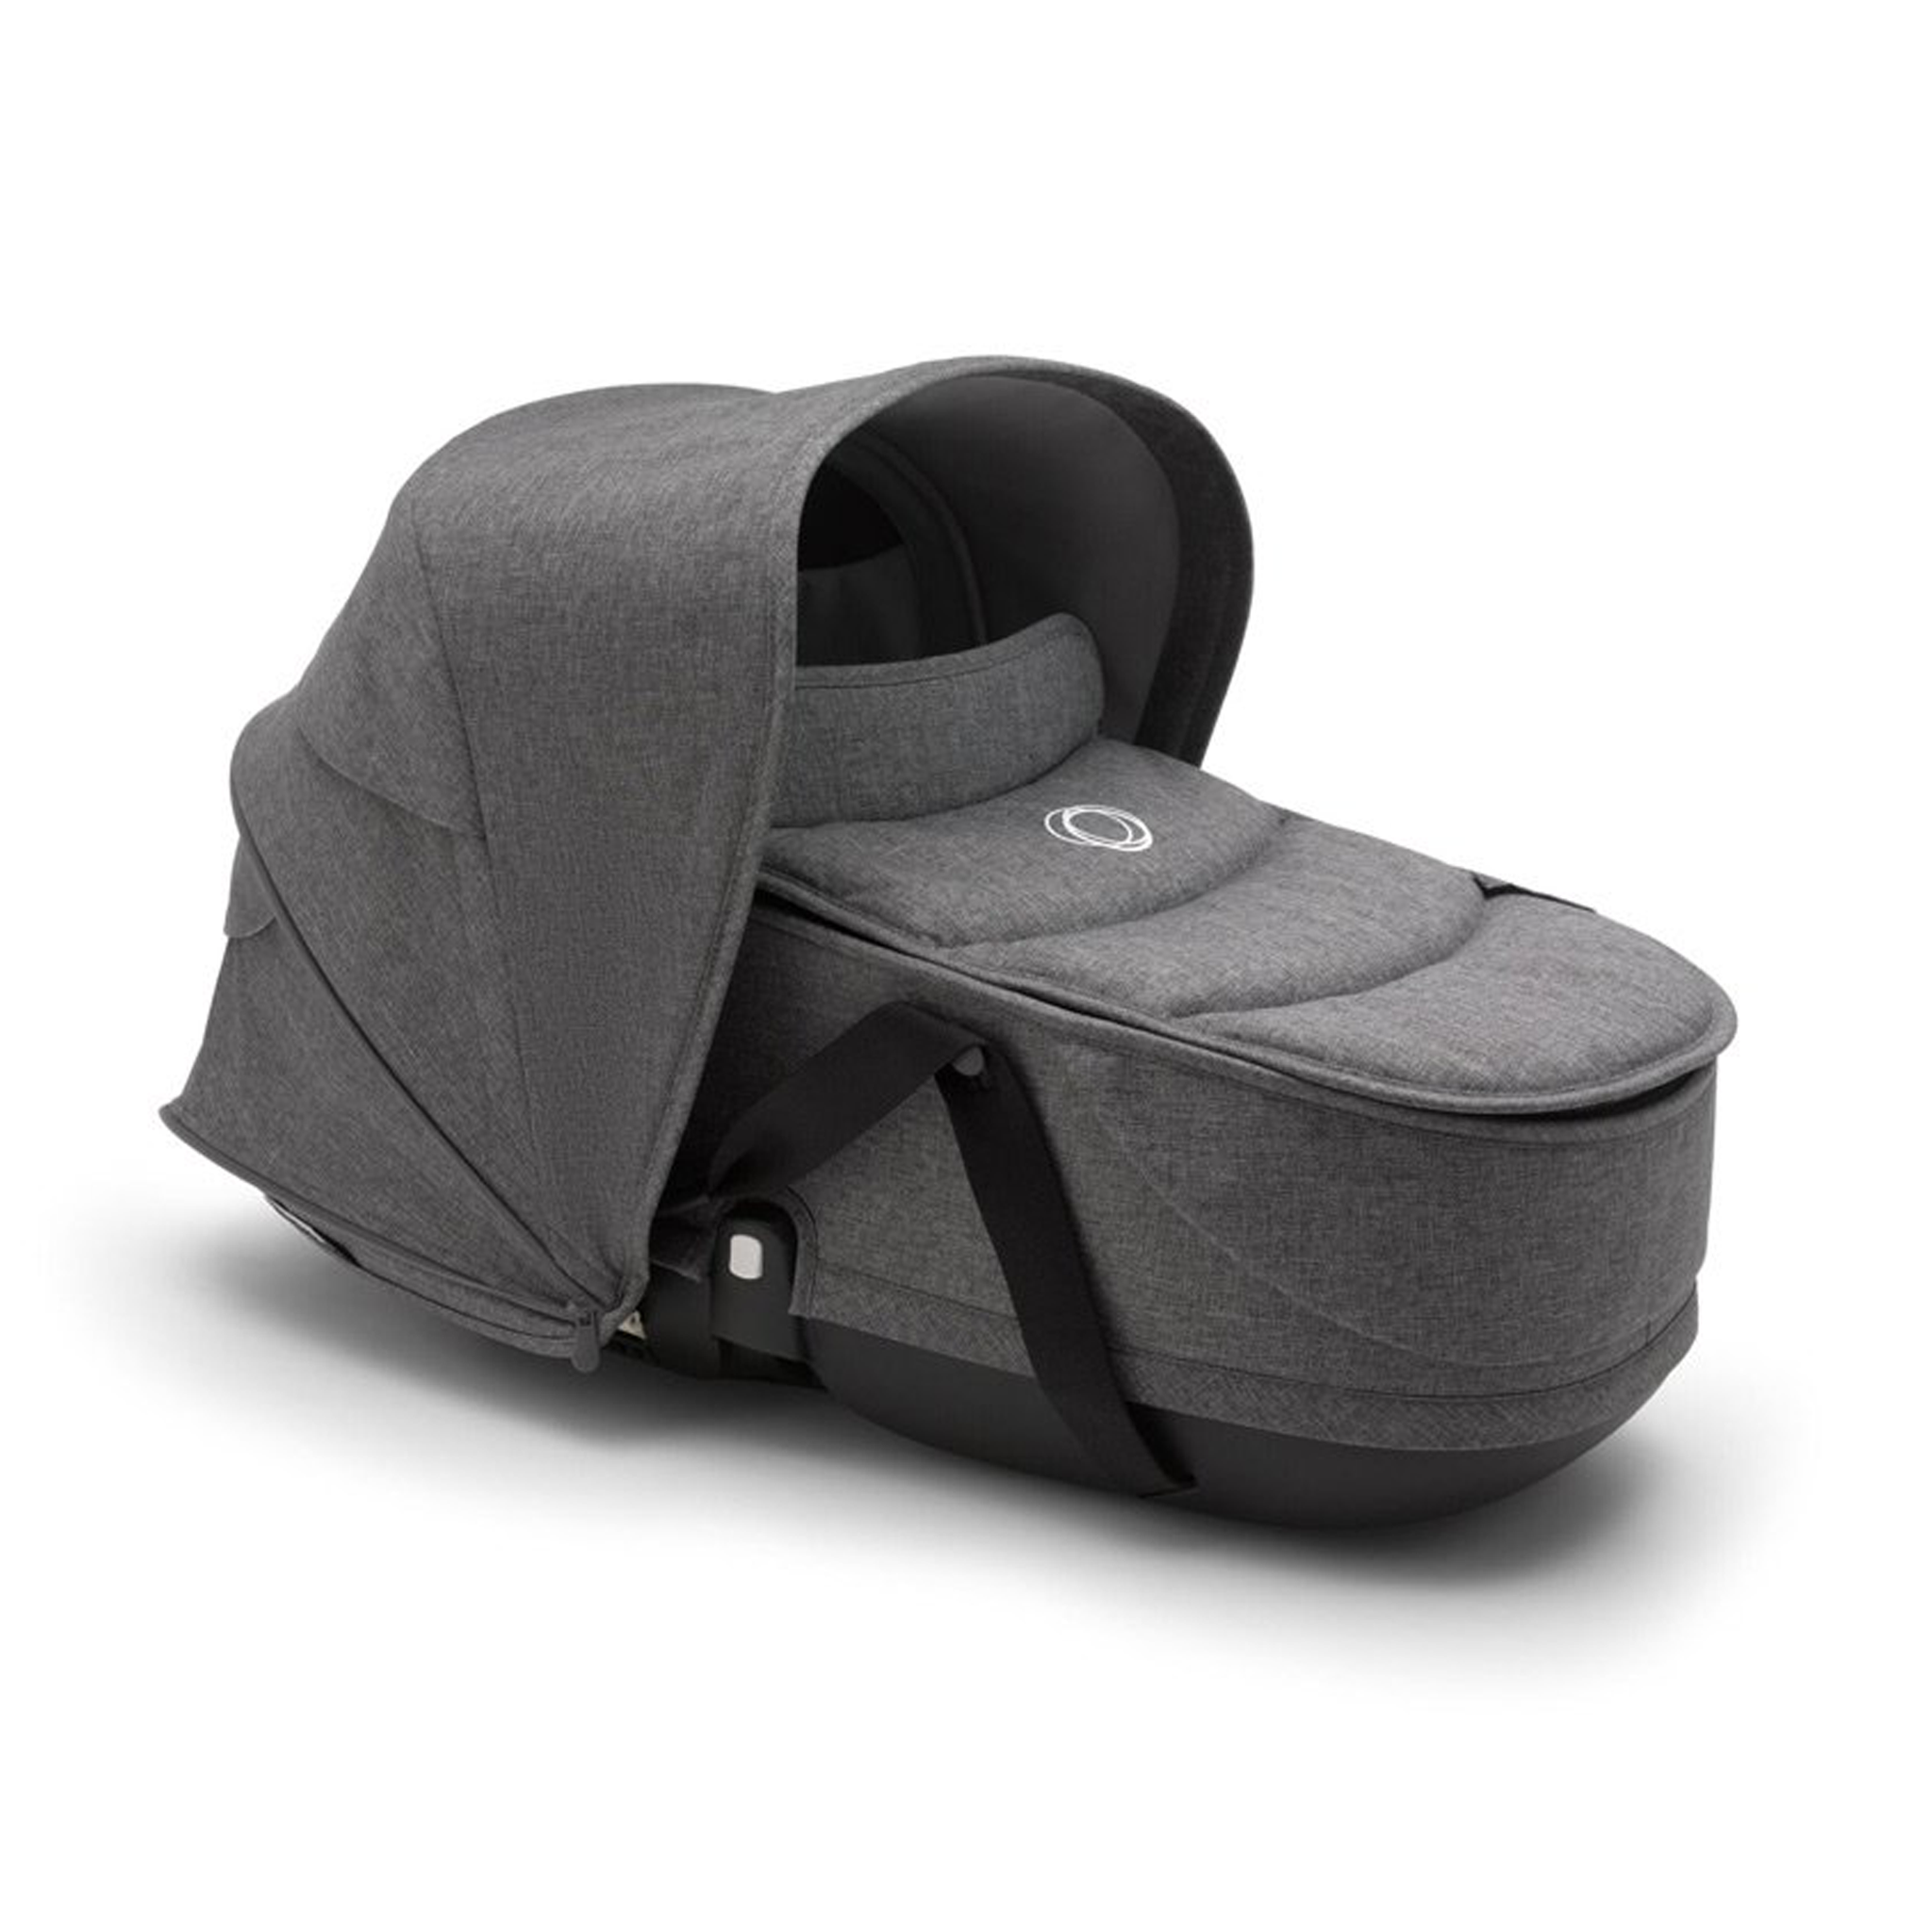 Bugaboo baby carrycots Bugaboo Bee 6 Carrycot Grey Melange 502306GM01